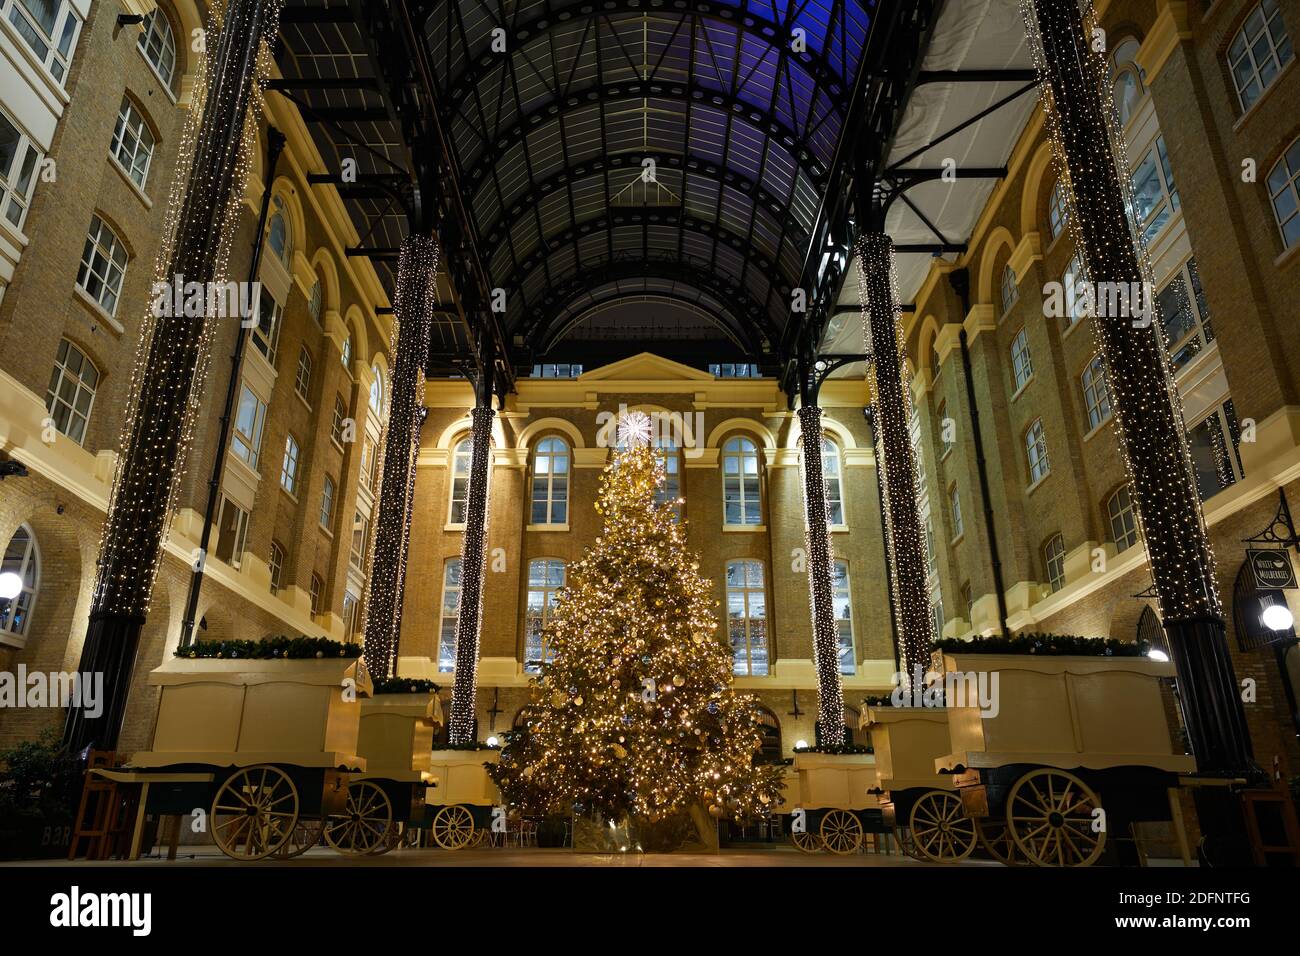 London, UK. - 6 Dec 2020: Hay's Galleria, a commerical and retail area near London Bridge, is decorated in festive lights and tree for Christmas 2020. Stock Photo